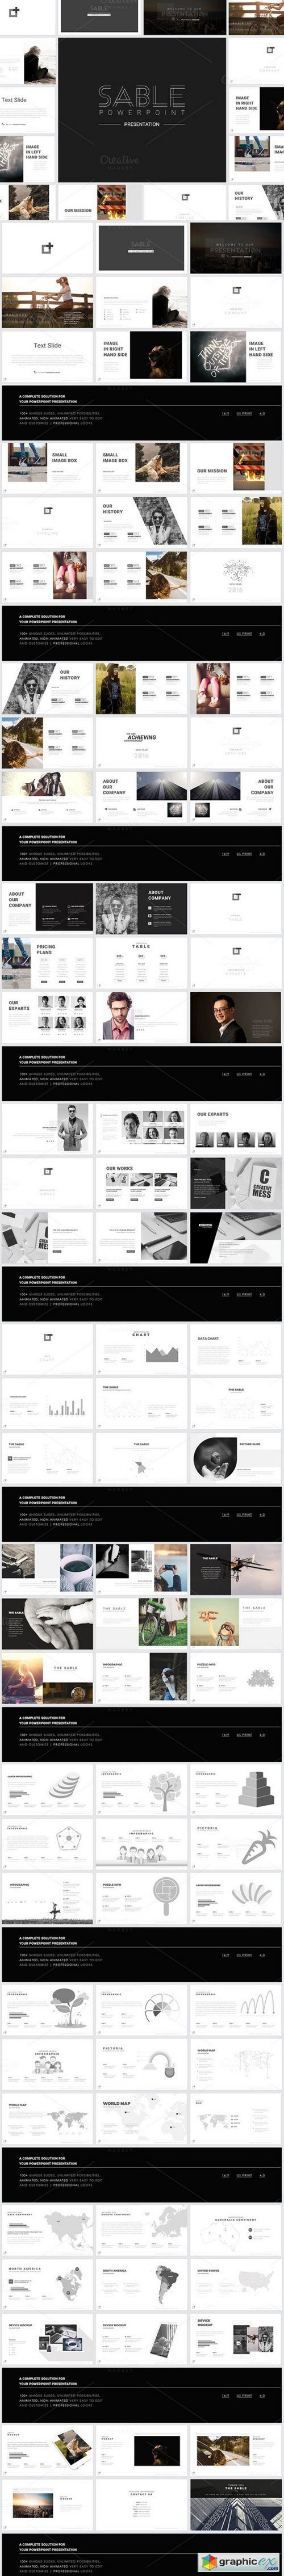 Sable Powerpoint Template